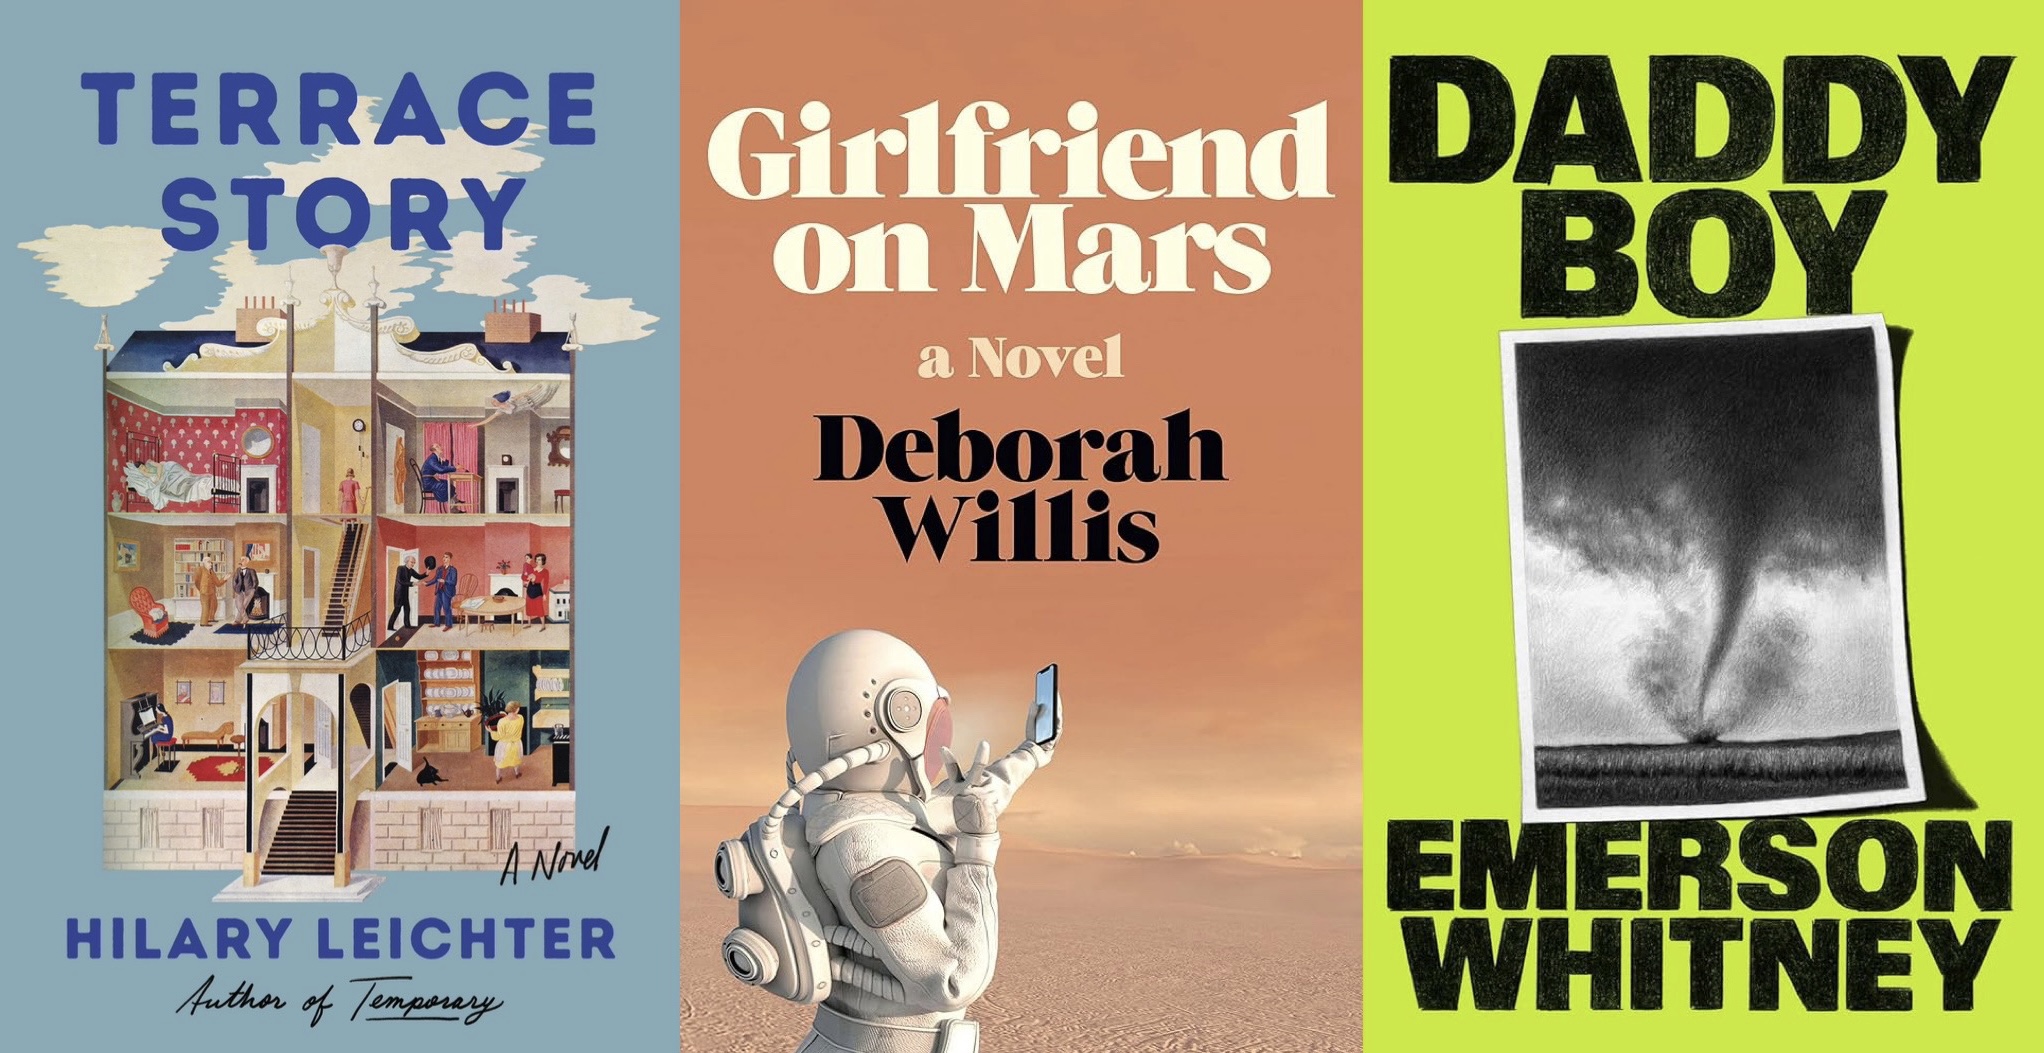 3 books to read this month: Girlfriend on Mars, Daddy Boy, Terrace Story